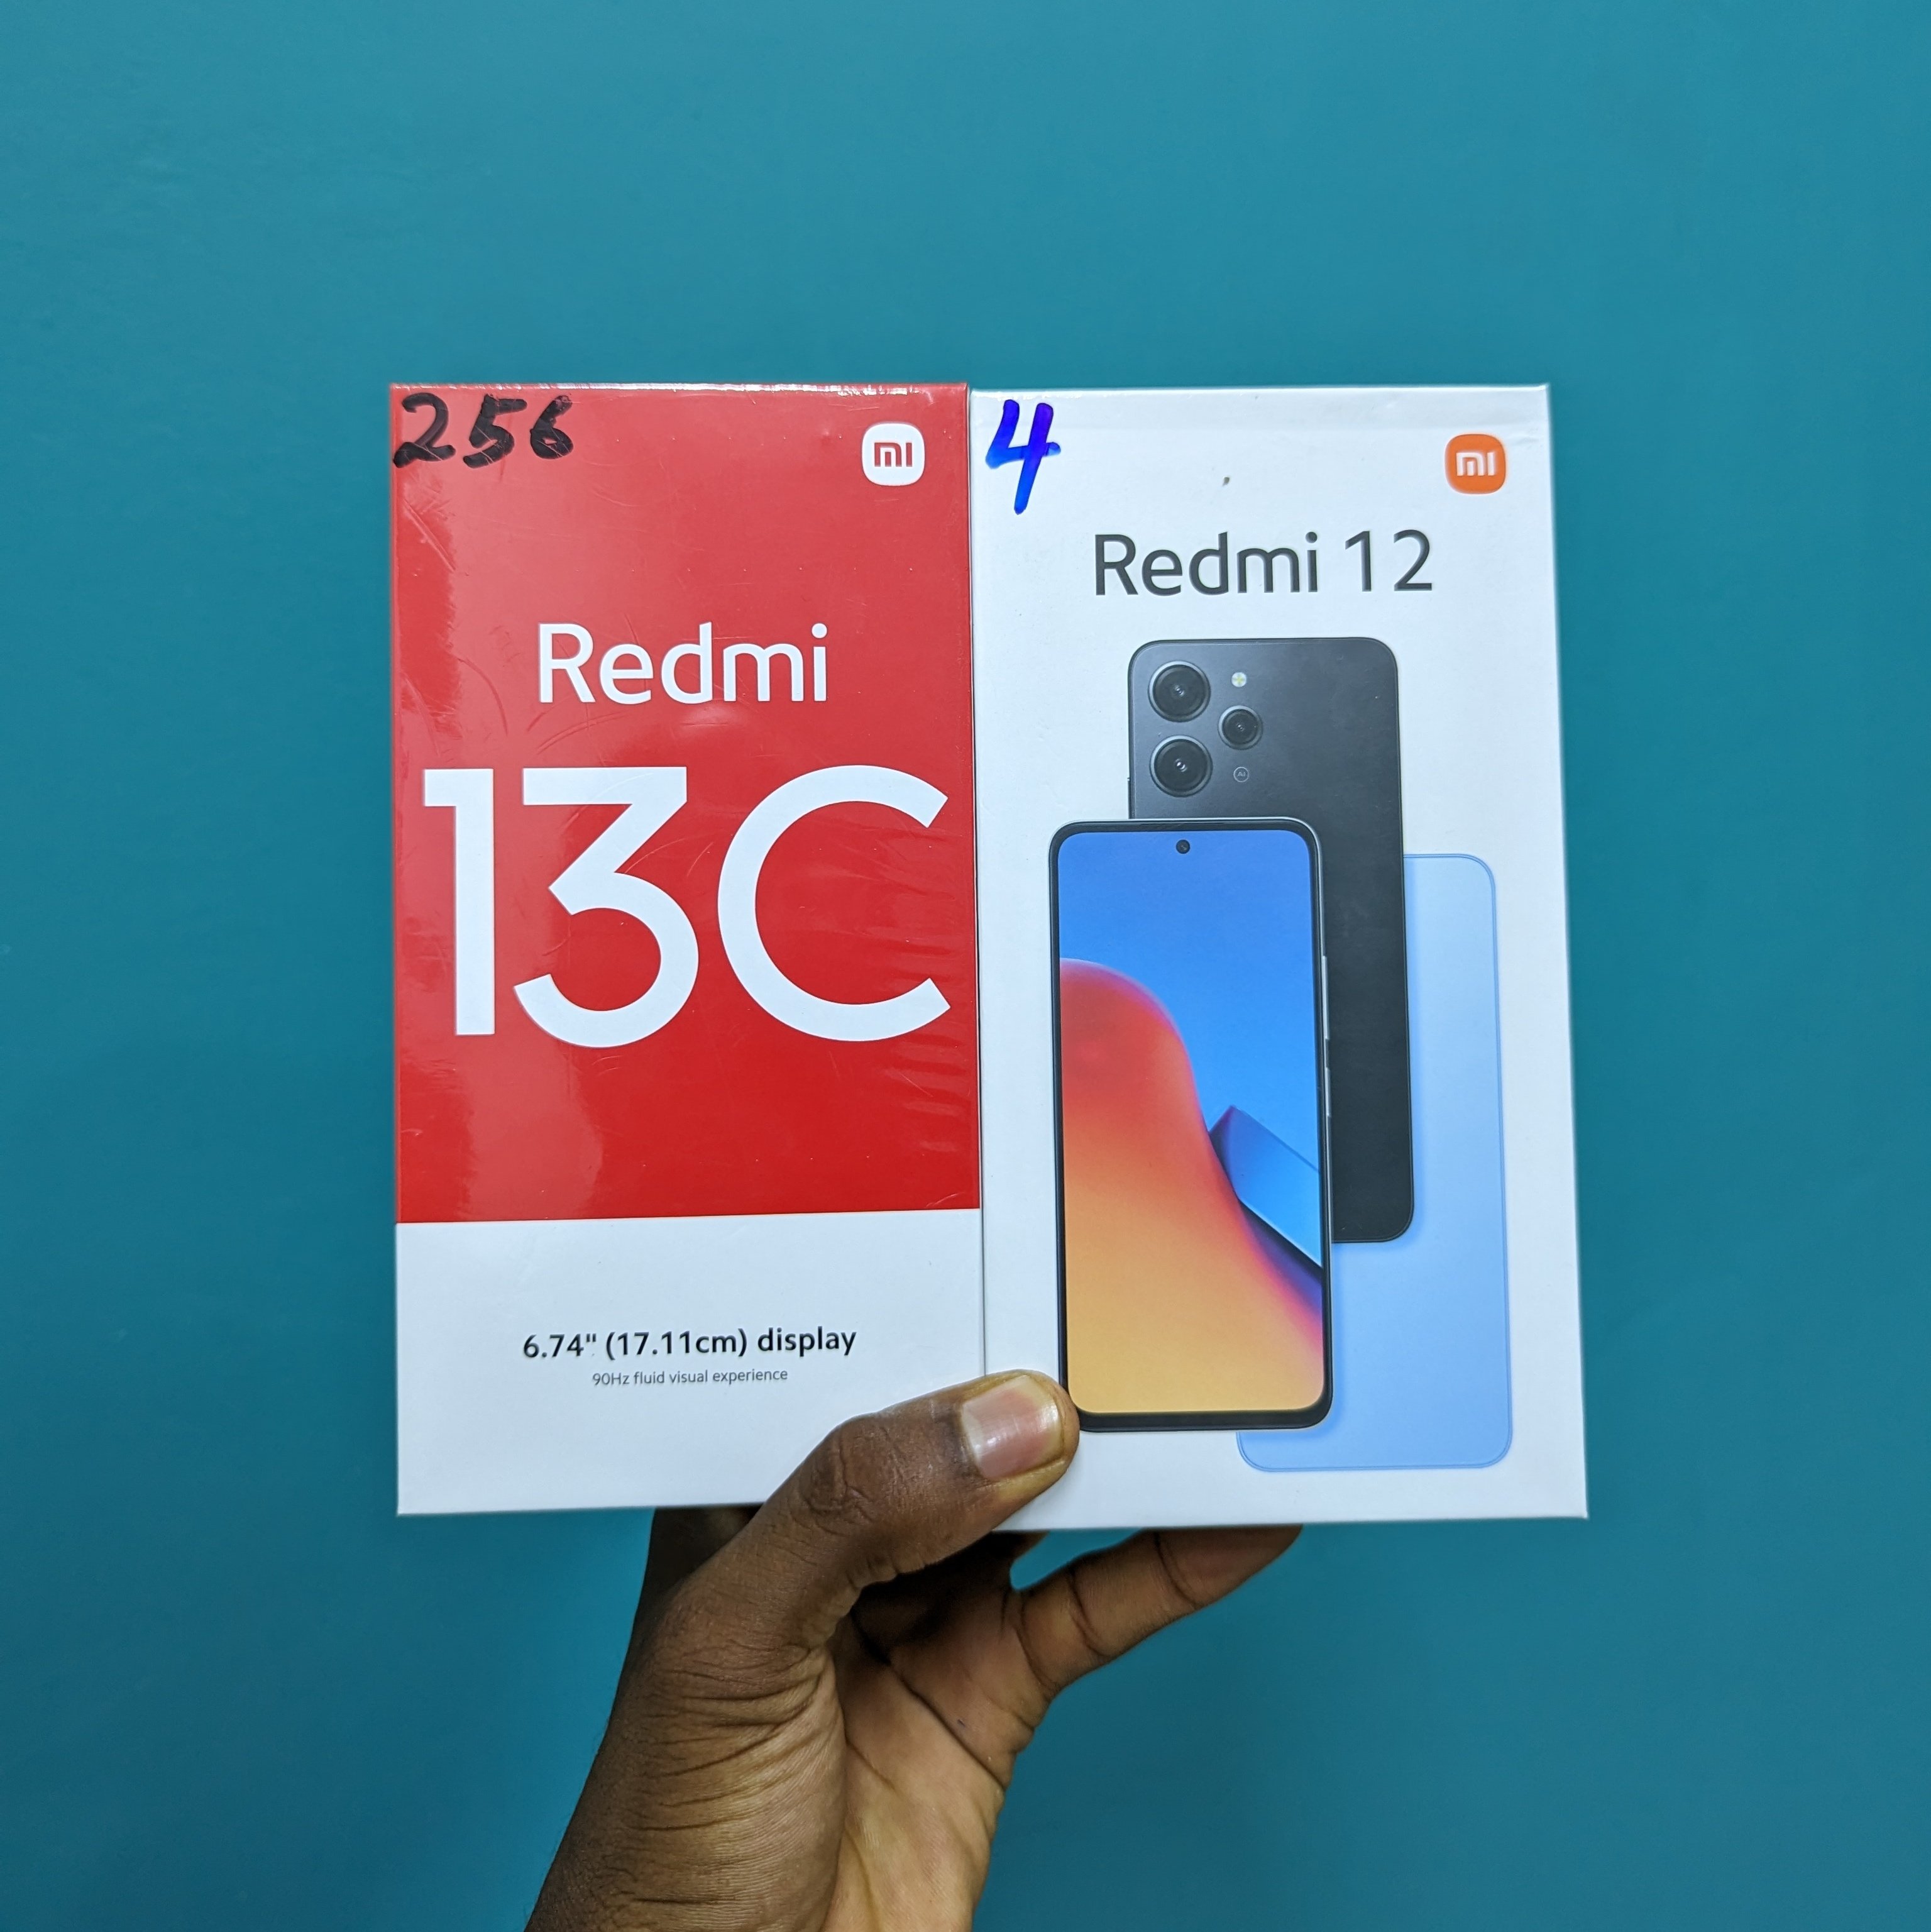 Al Anees - 🚨 Fantastic Friday is On! 🥳 📱 Buy Xiaomi Redmi 13C, 8GB 256GB  Now for QR 449 (was QR 499). 🕒 Valid Only on 26th Jan. 🛍 Shop Online 